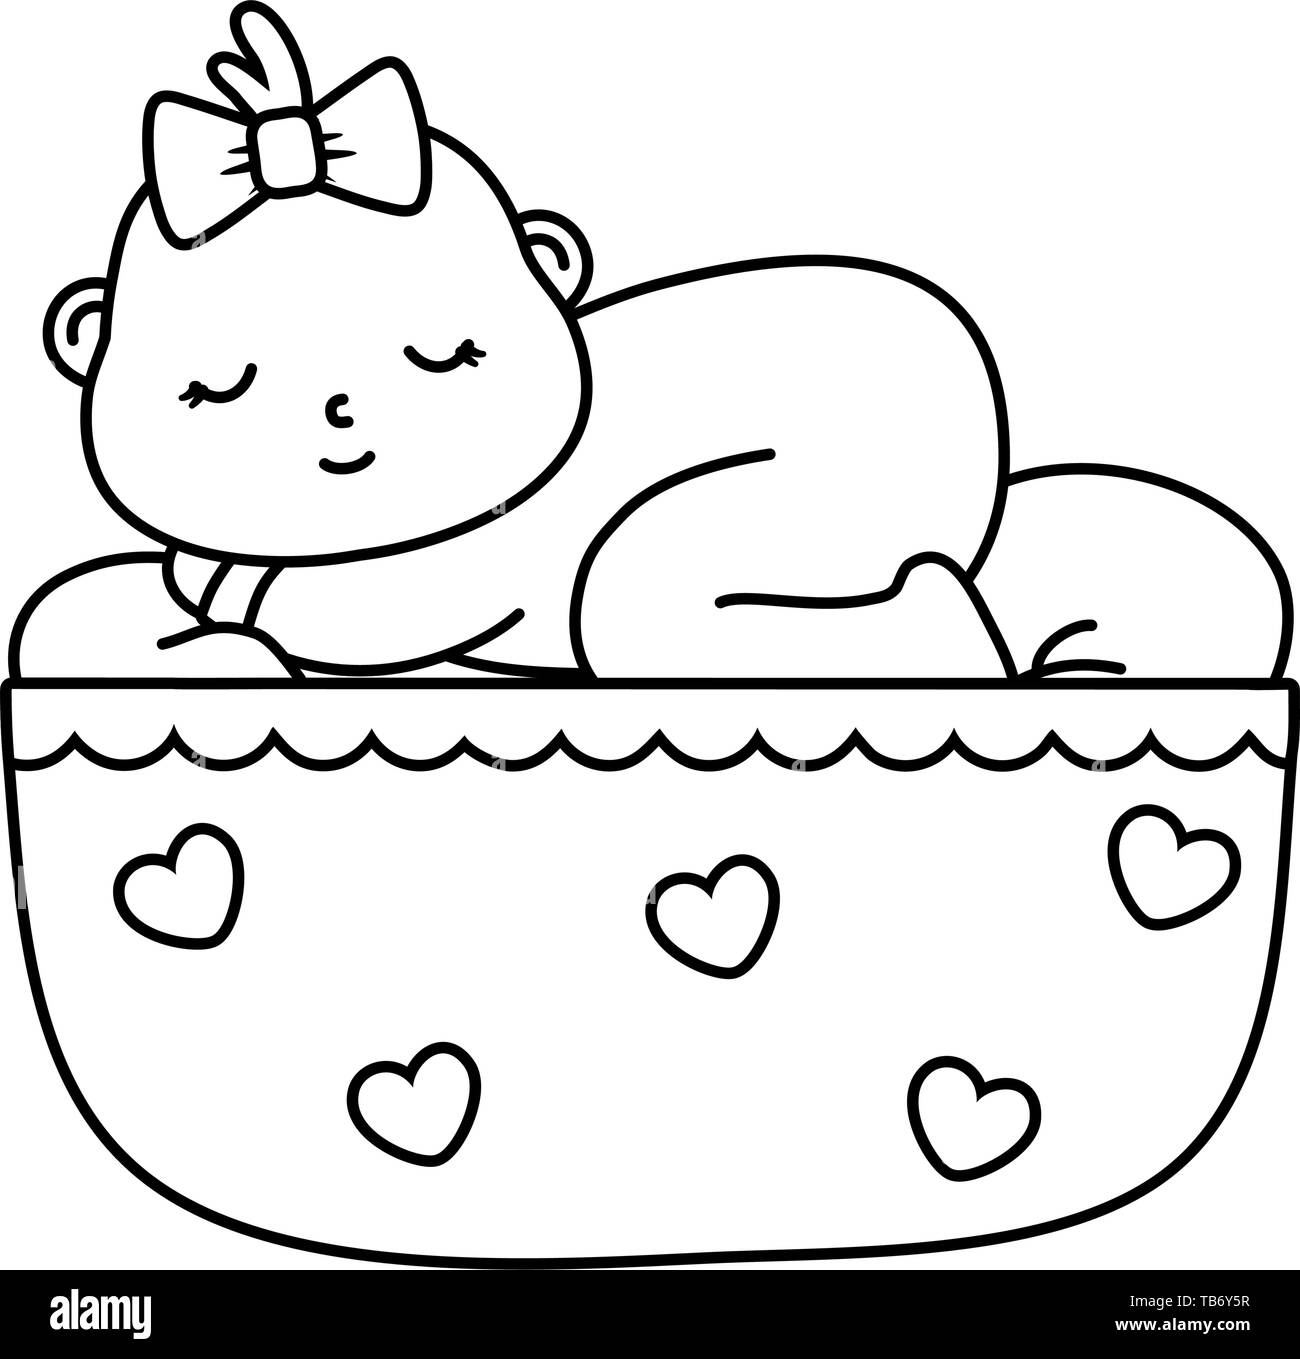 baby sleeping in a cradle with bow vector illustration graphic design Stock Vector